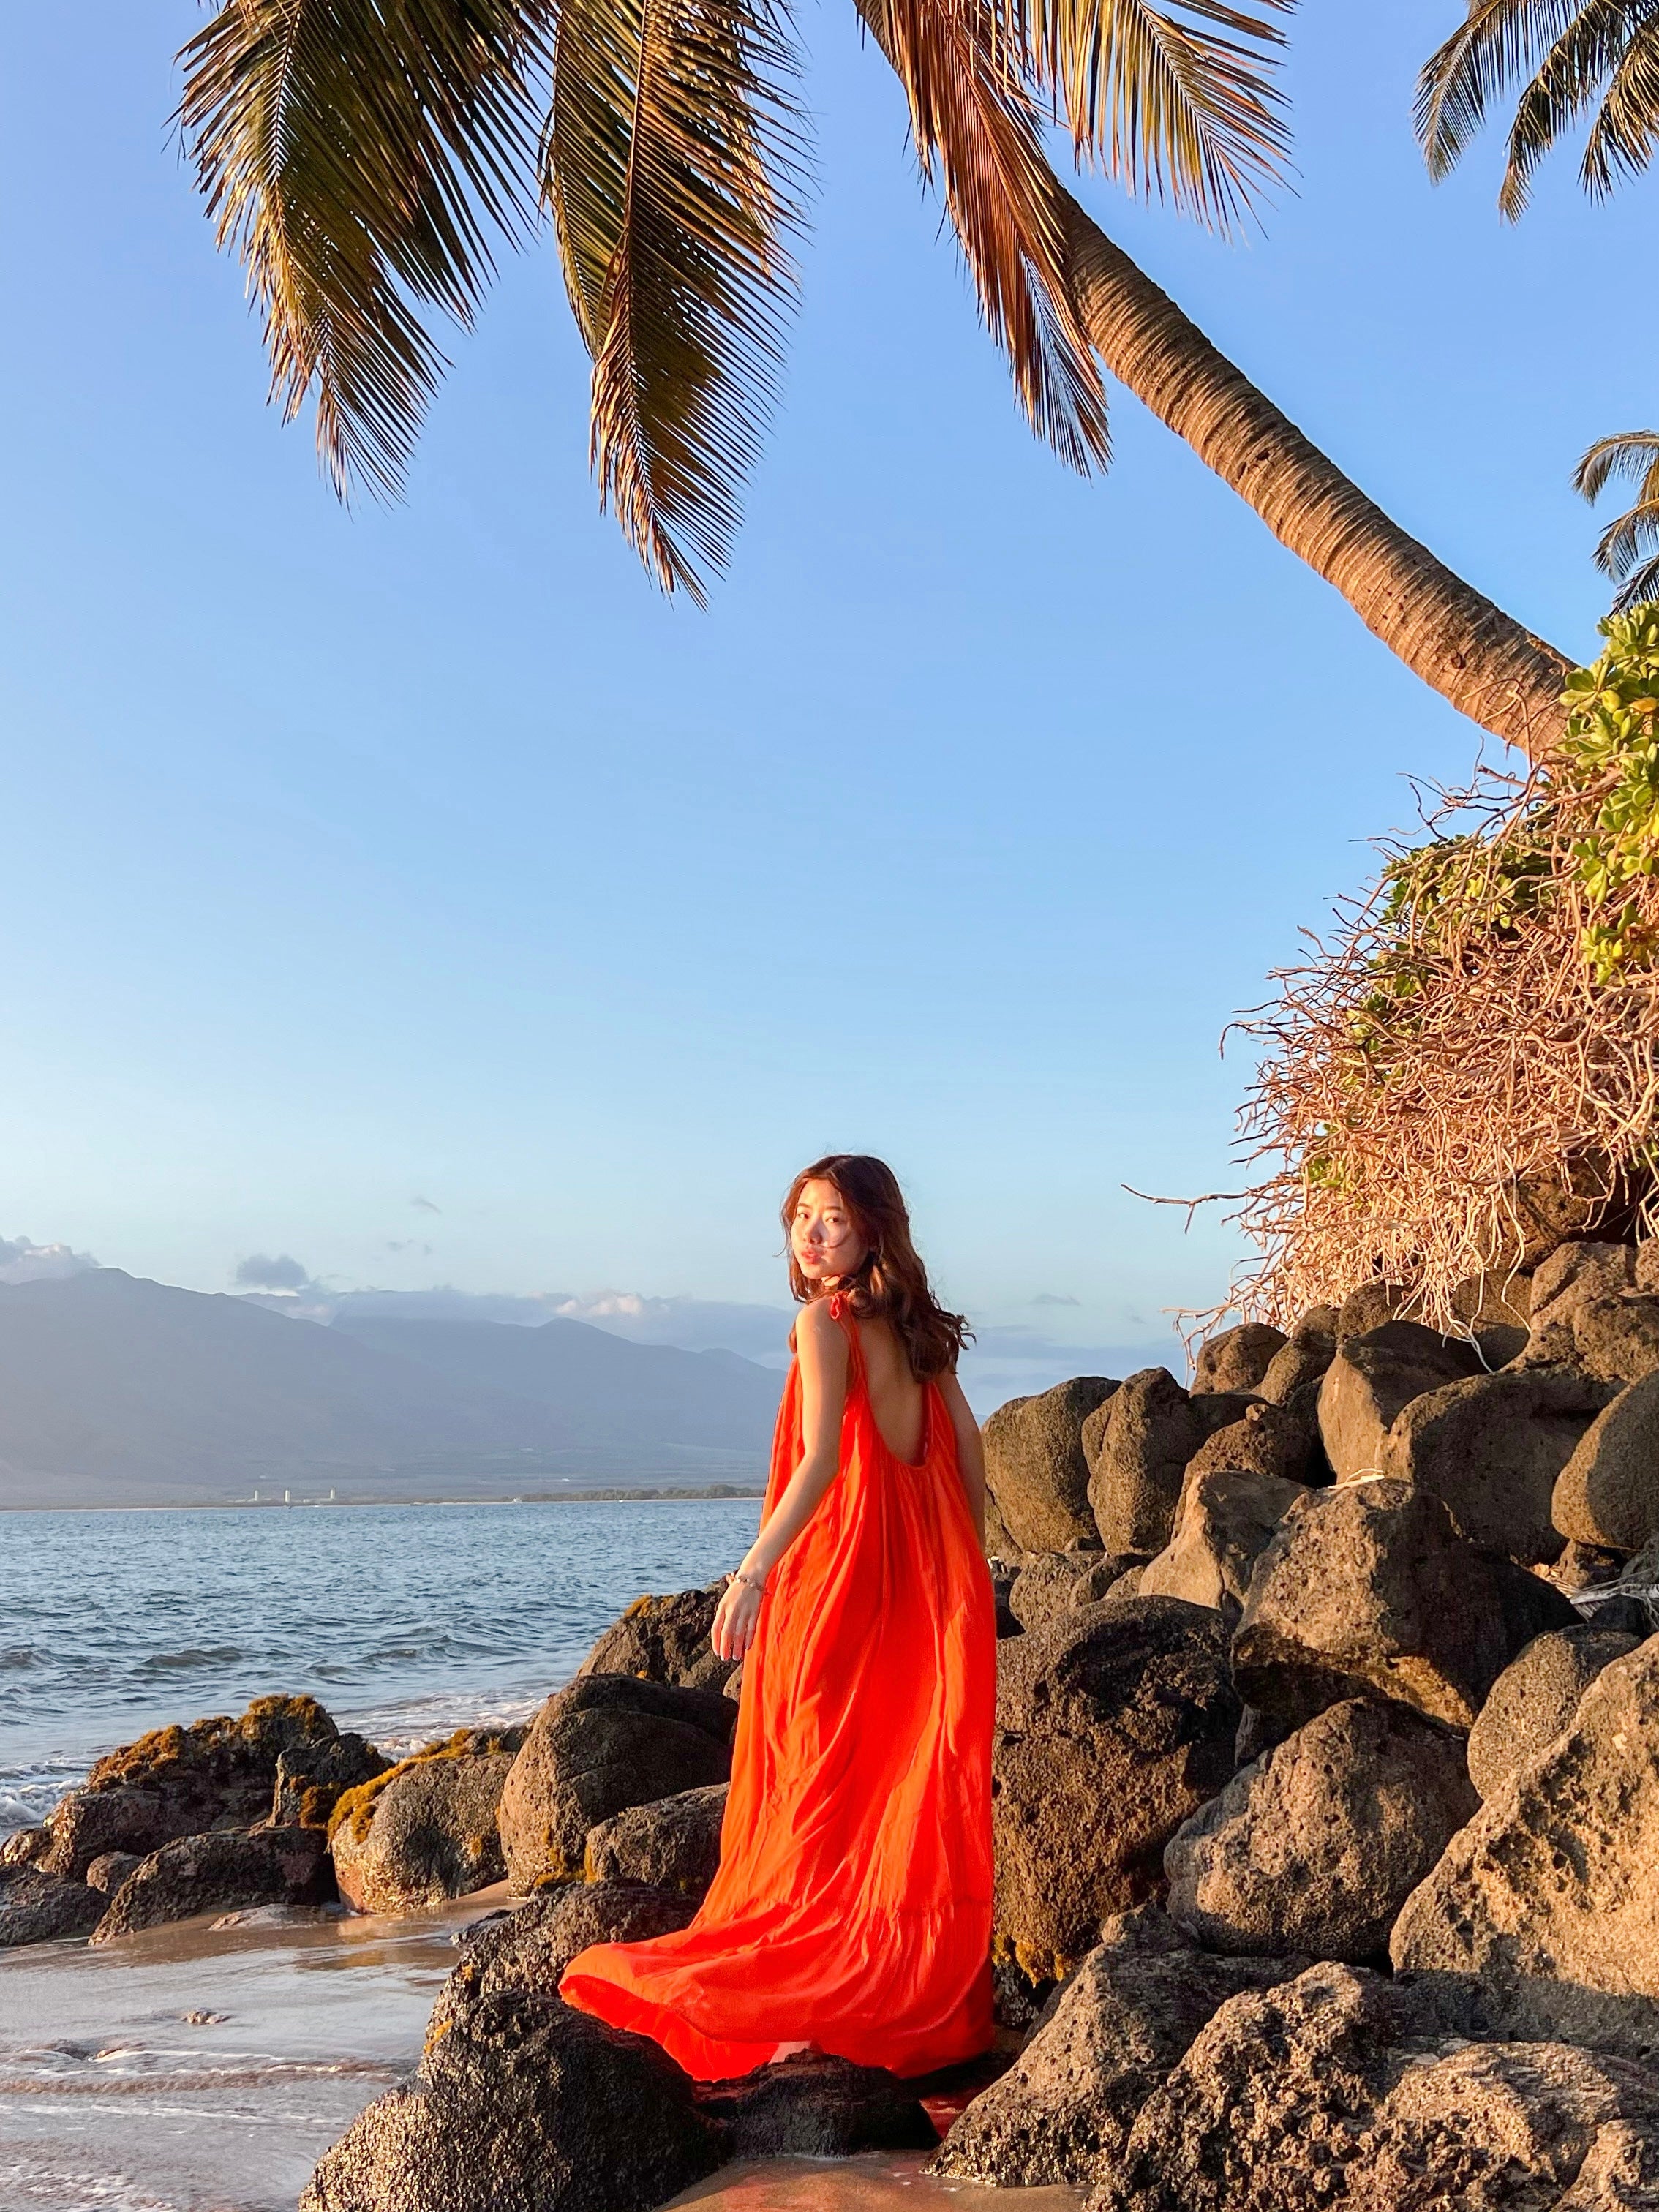 Unleash your inner fashionista with our Orange Backless Maxi Dress from Mali Dress Collection